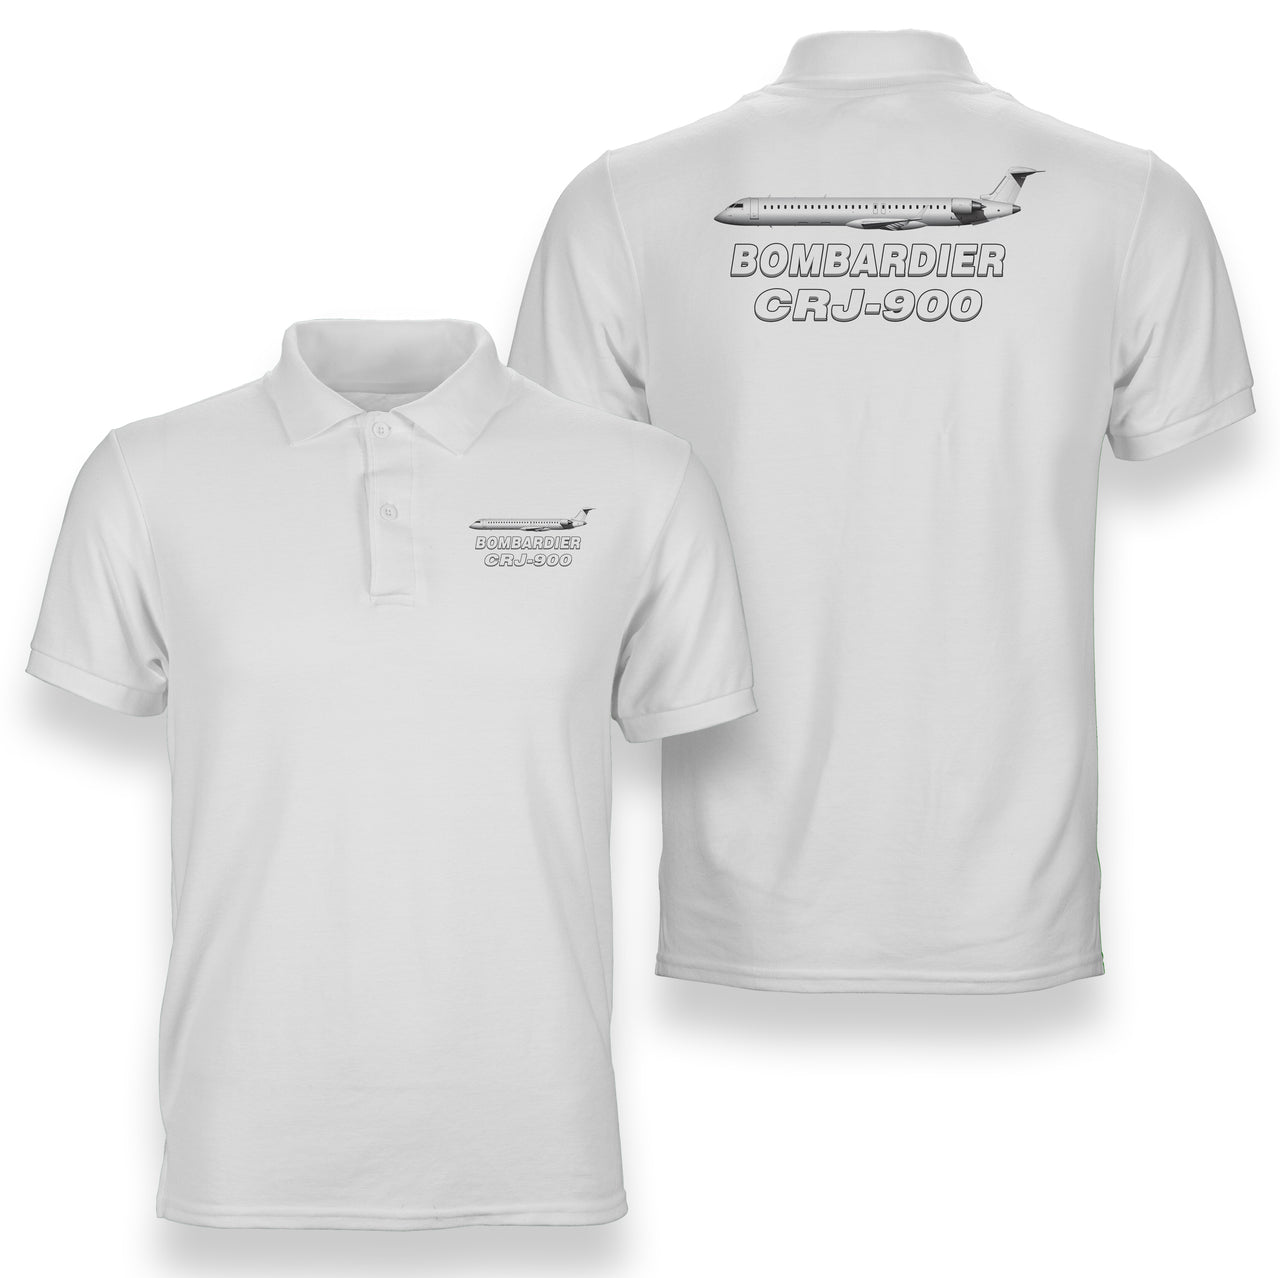 The Bombardier CRJ-900 Designed Double Side Polo T-Shirts